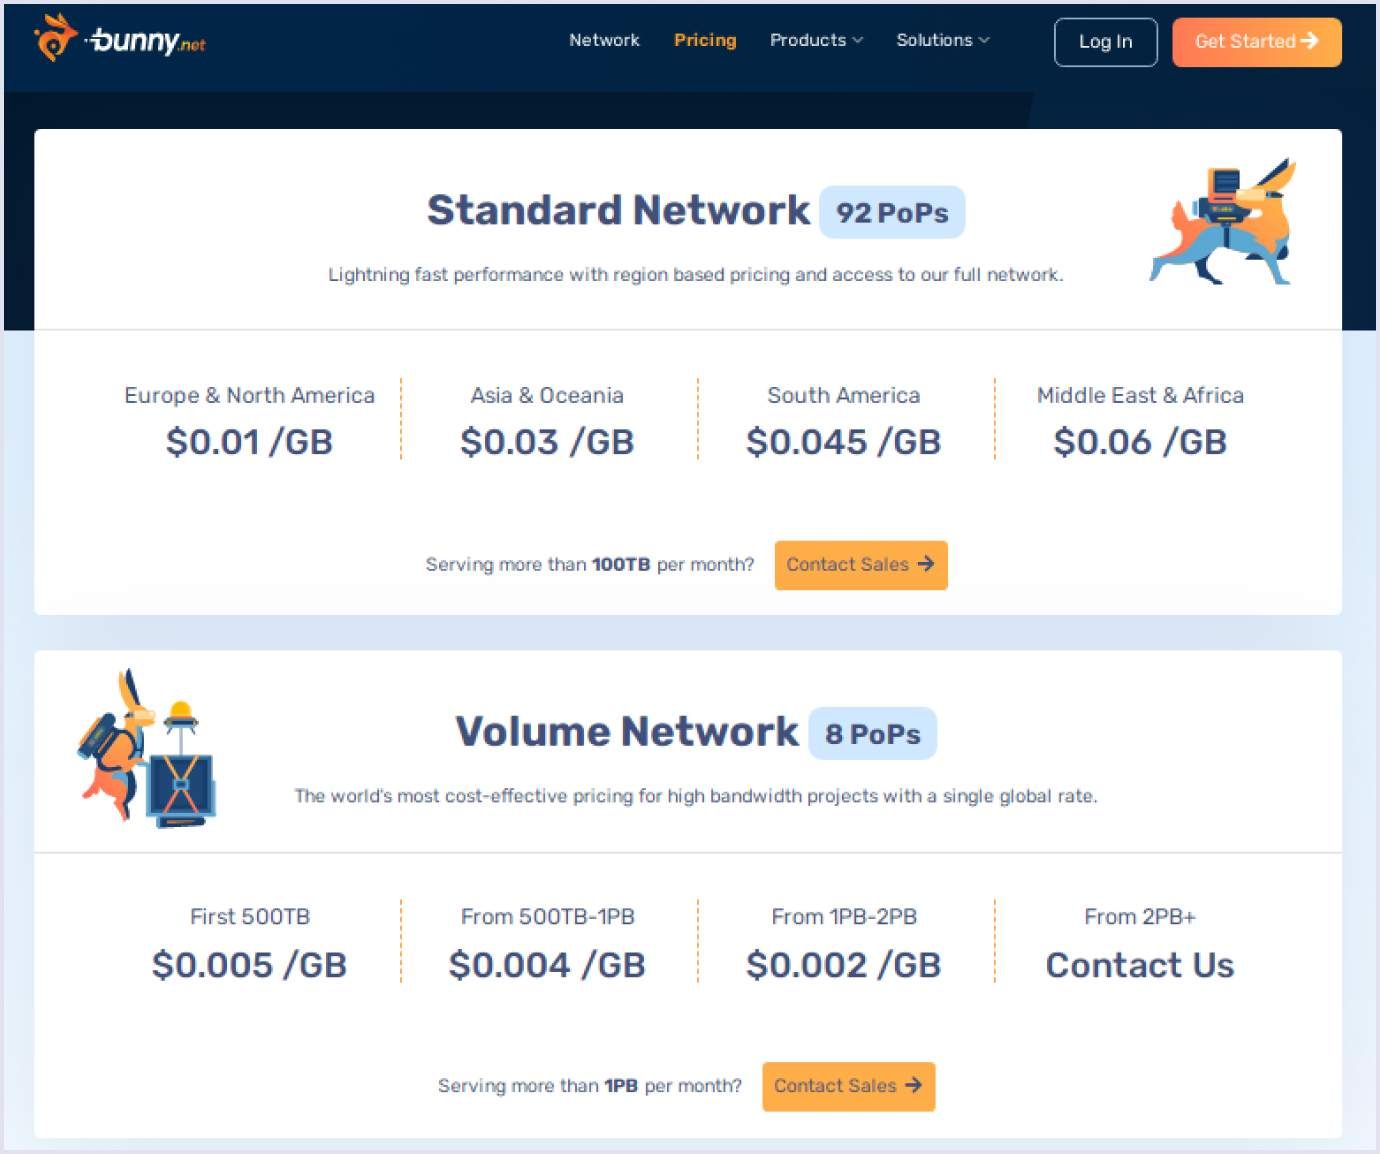 Pay As You Go SaaS pricing model example by BunnyCDN